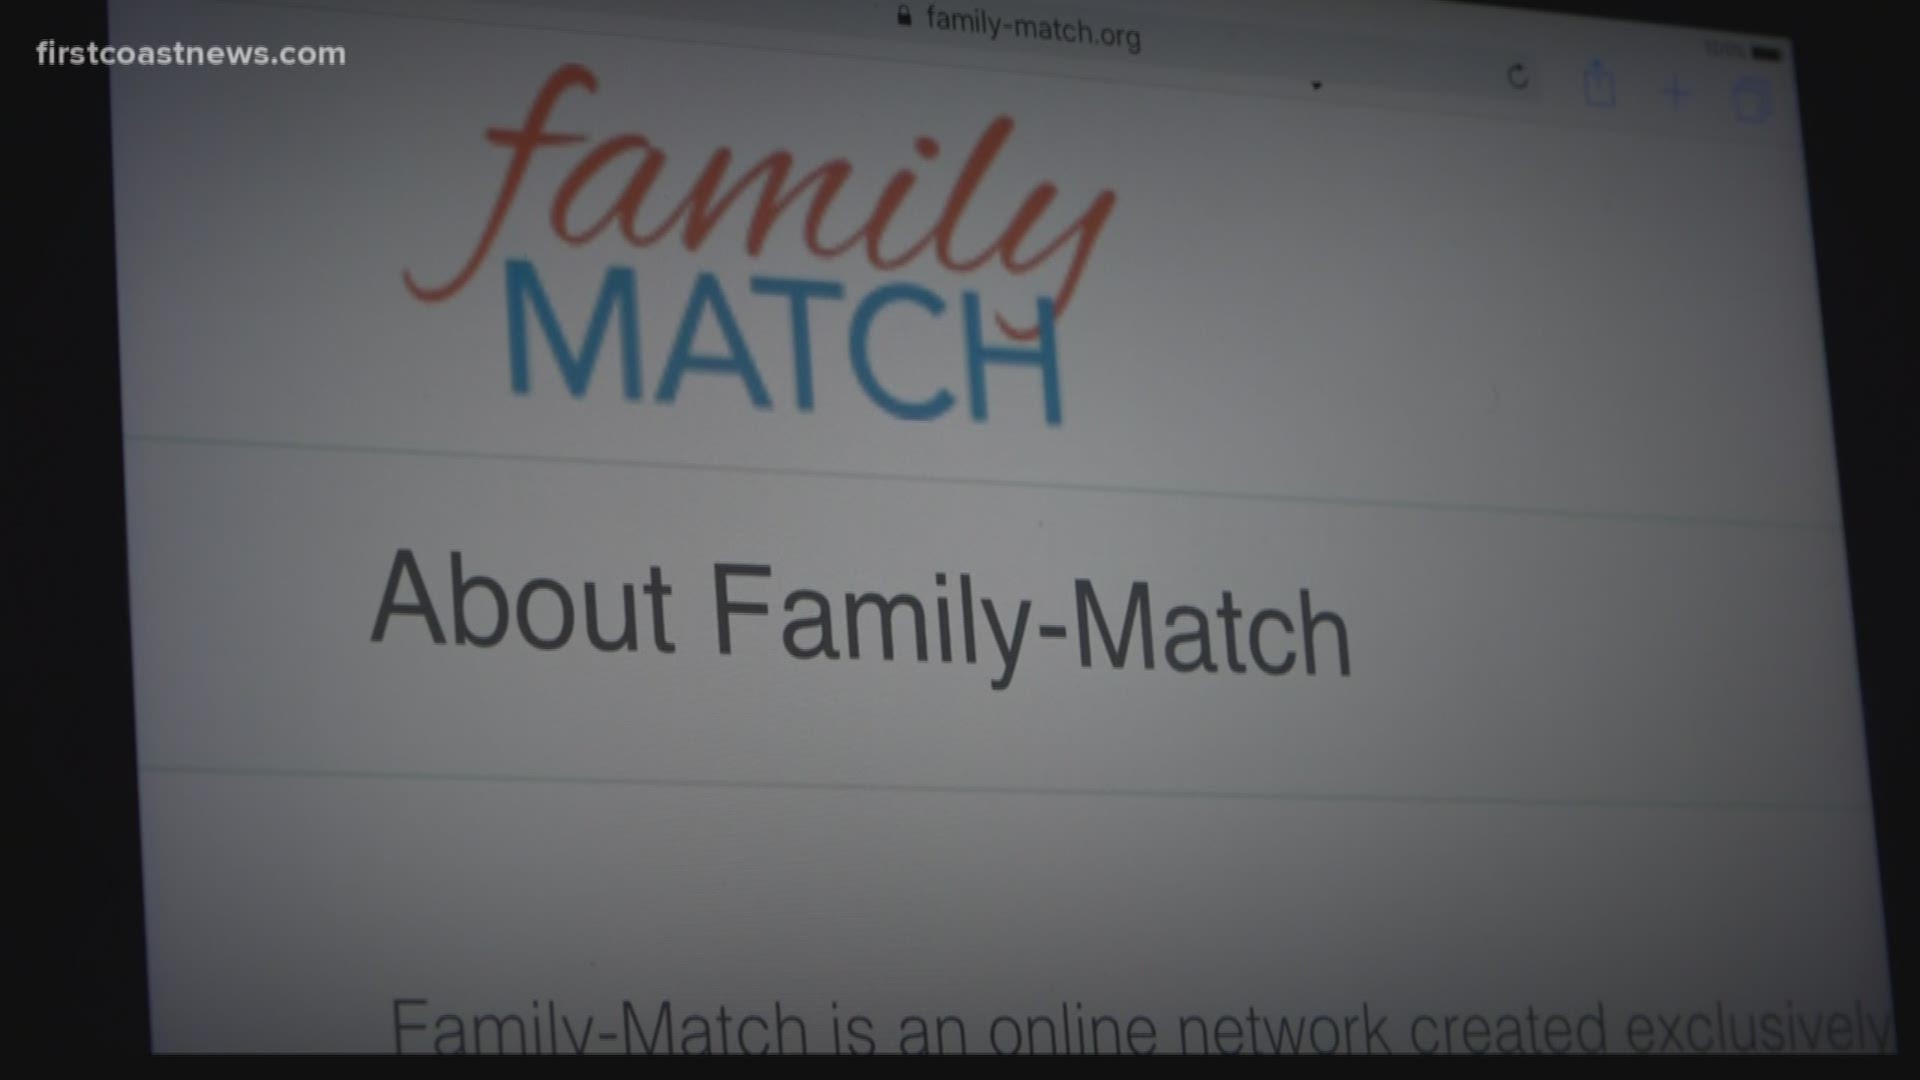 Family-Match helps match adoptive familes with children in foster care based on their compatibility.